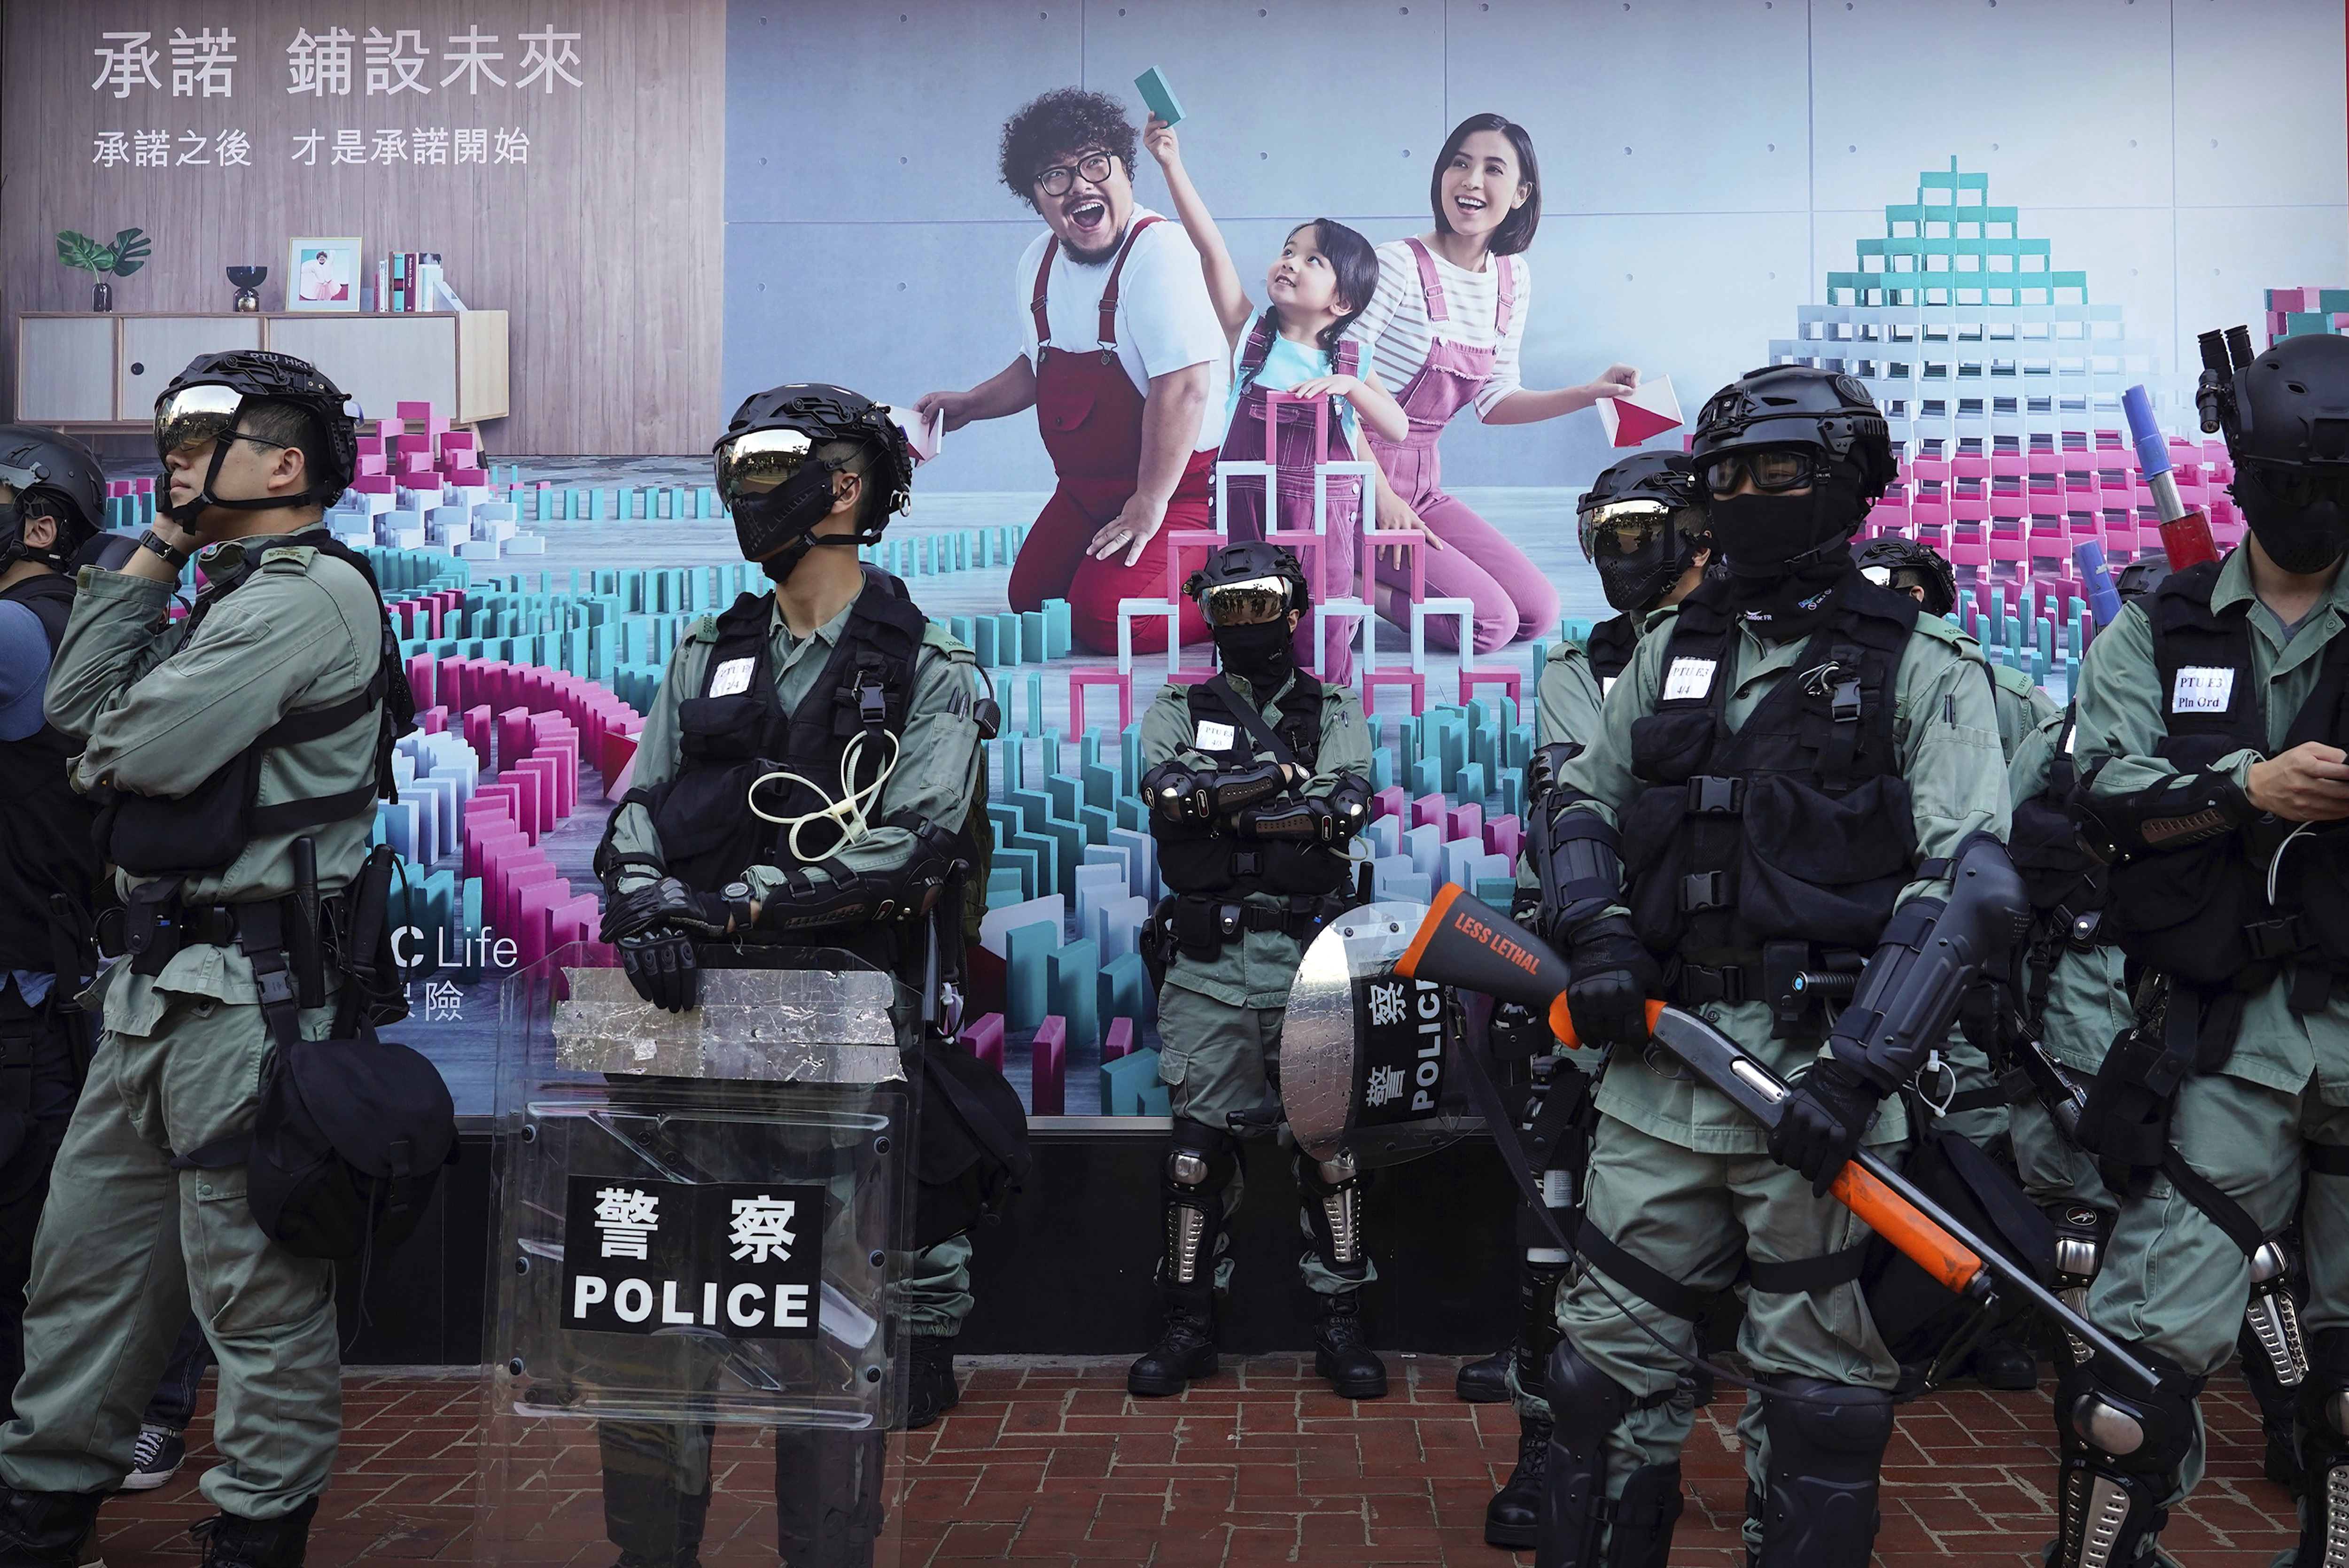 Police officers in riot gear gather in front of a billboard during an anti-government protest in Hong Kong, Saturday, Nov. 2, 2019. Defying a police ban, thousands of black-clad masked protesters are streaming into Hong Kong's central shopping district for another rally demanding autonomy in the Chinese territory as Beijing indicated it could tighten its grip. (AP Photo/Vincent Yu)